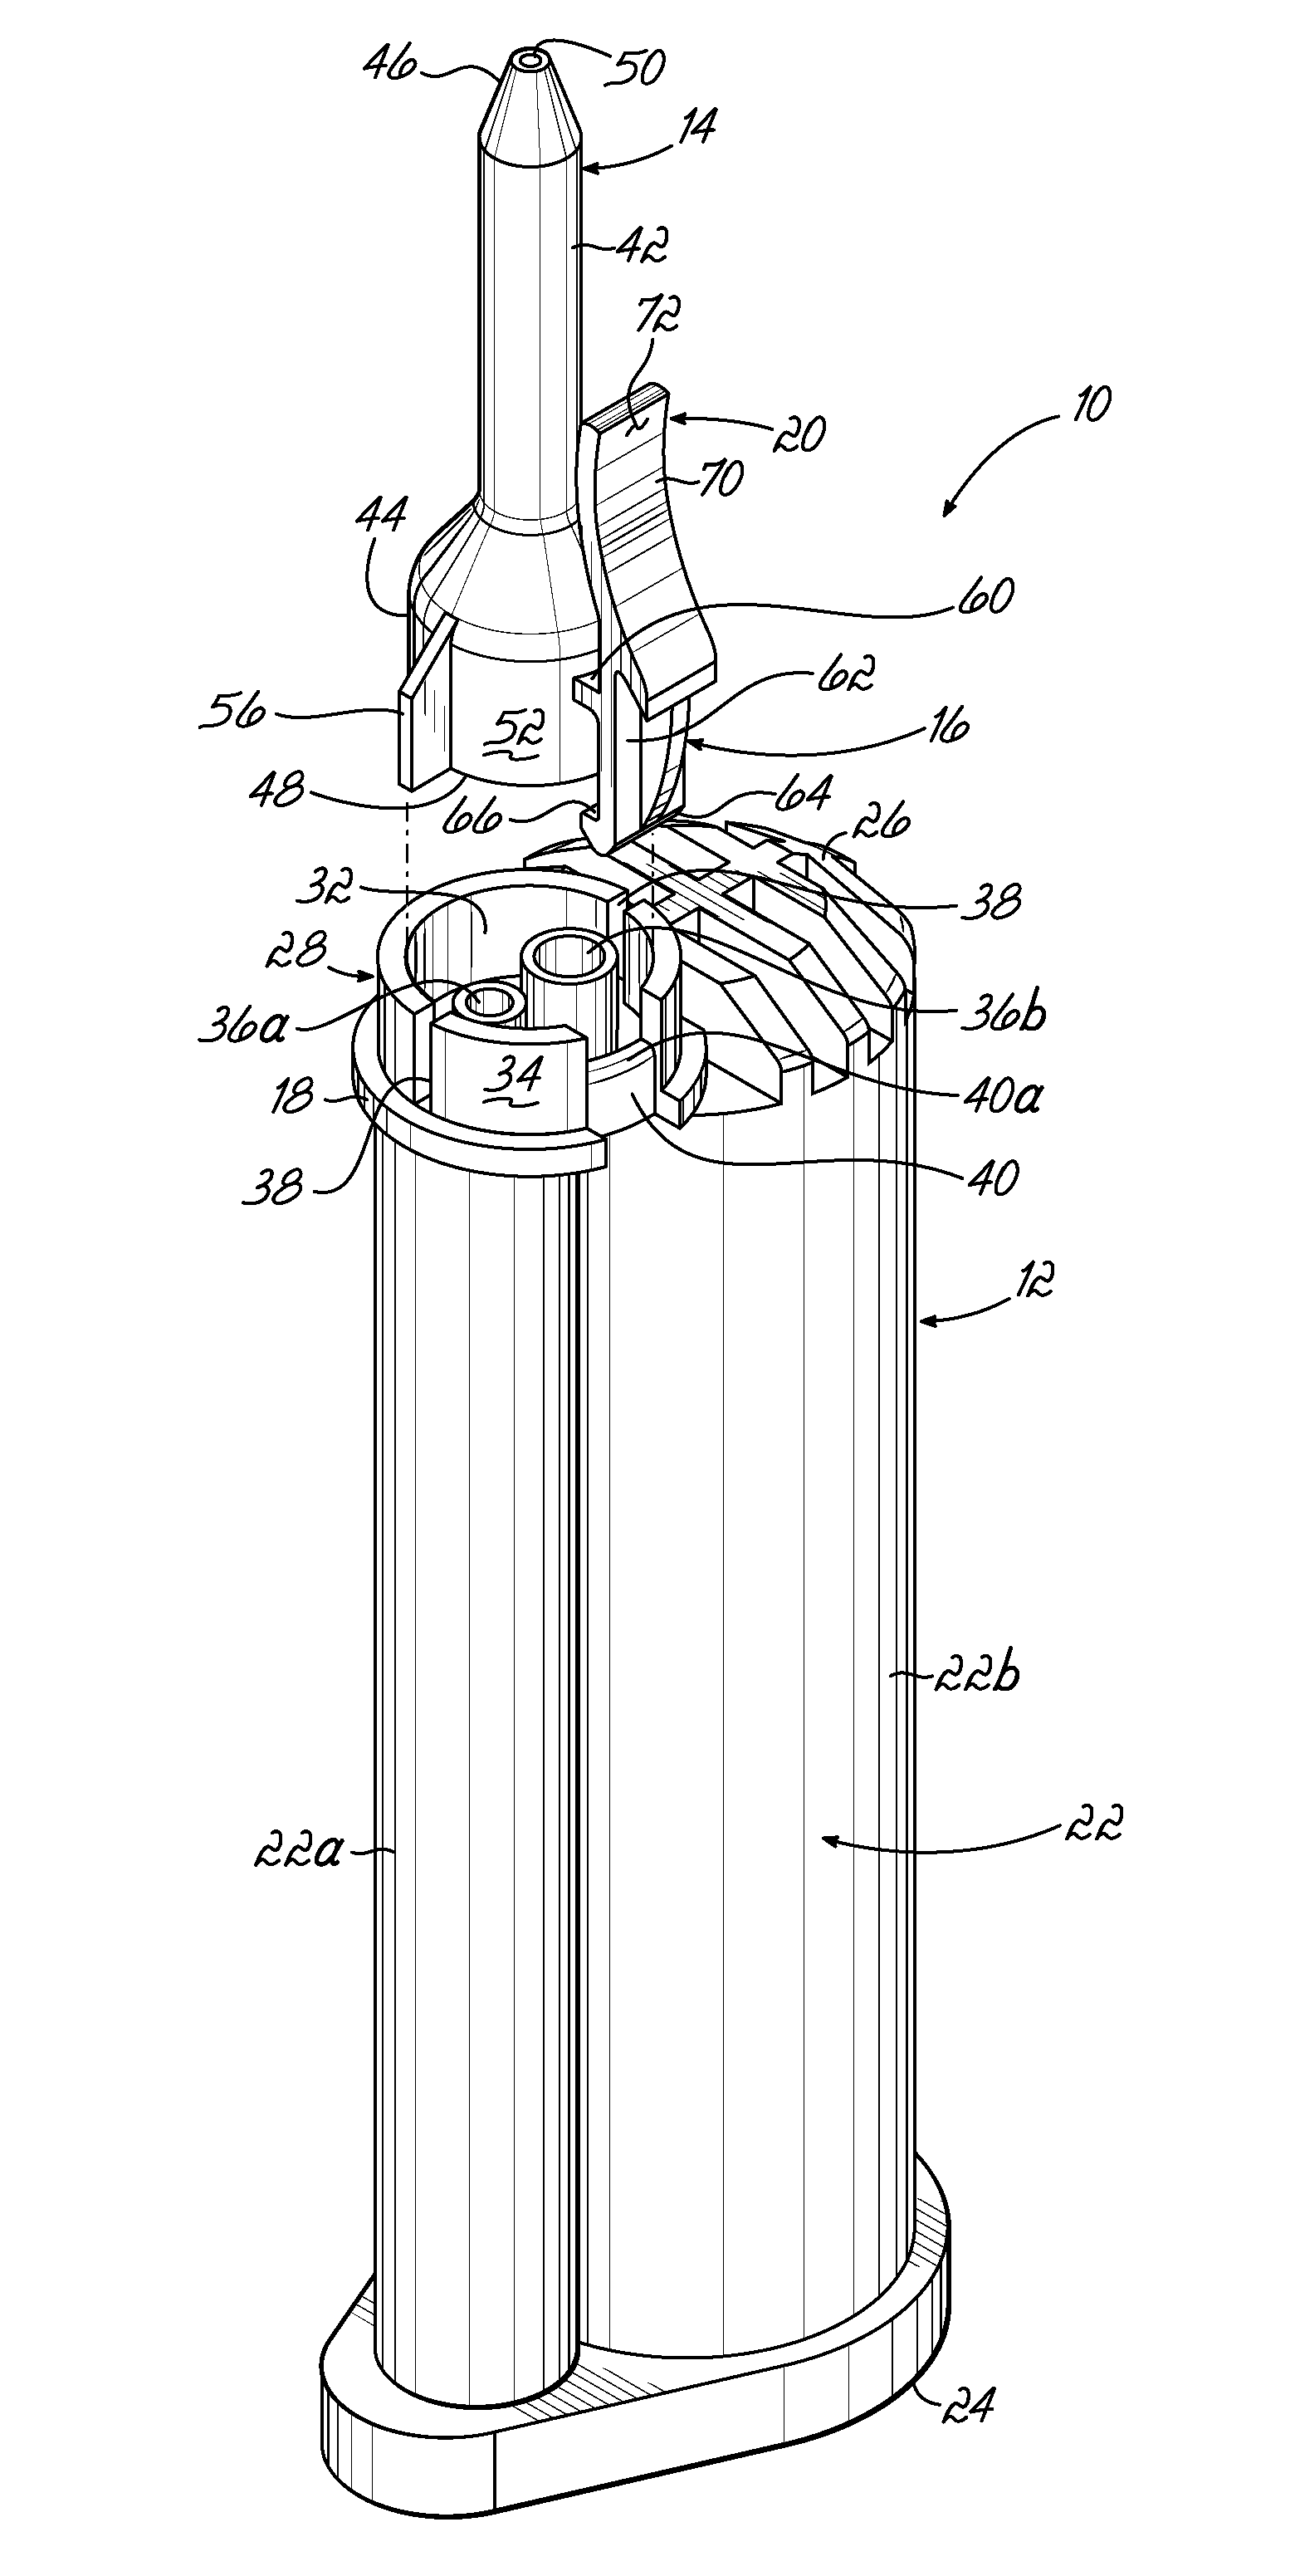 Dispensing assembly and method using snap engagement of a mixer and a cartridge